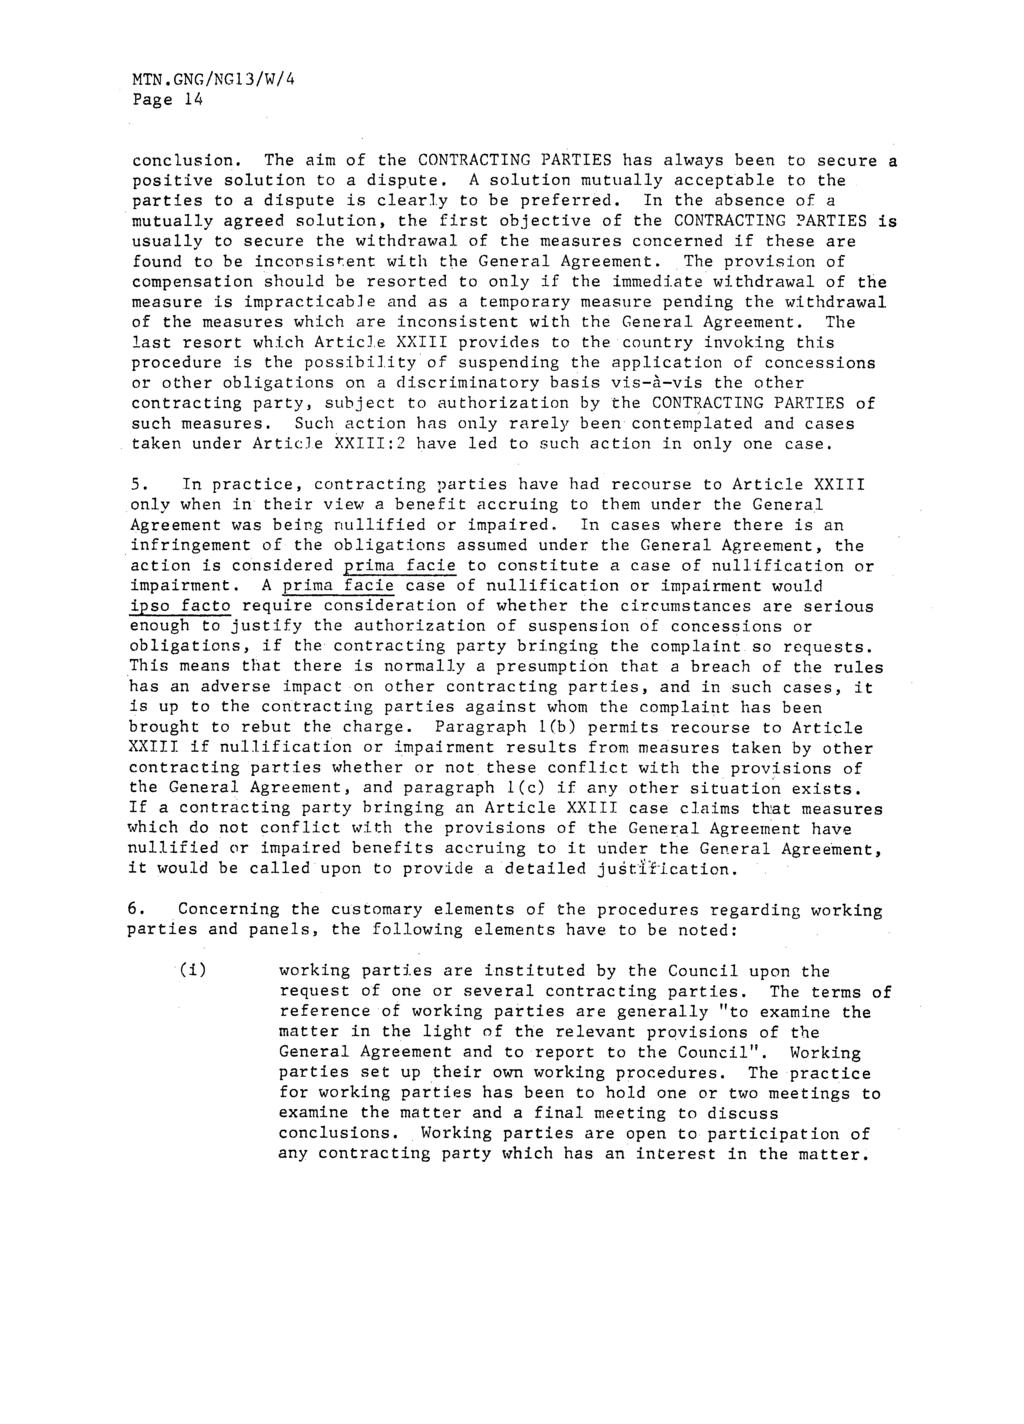 Page 14 conclusion. The aim of the CONTRACTING PARTIES has always been to secure a positive solution to a dispute.